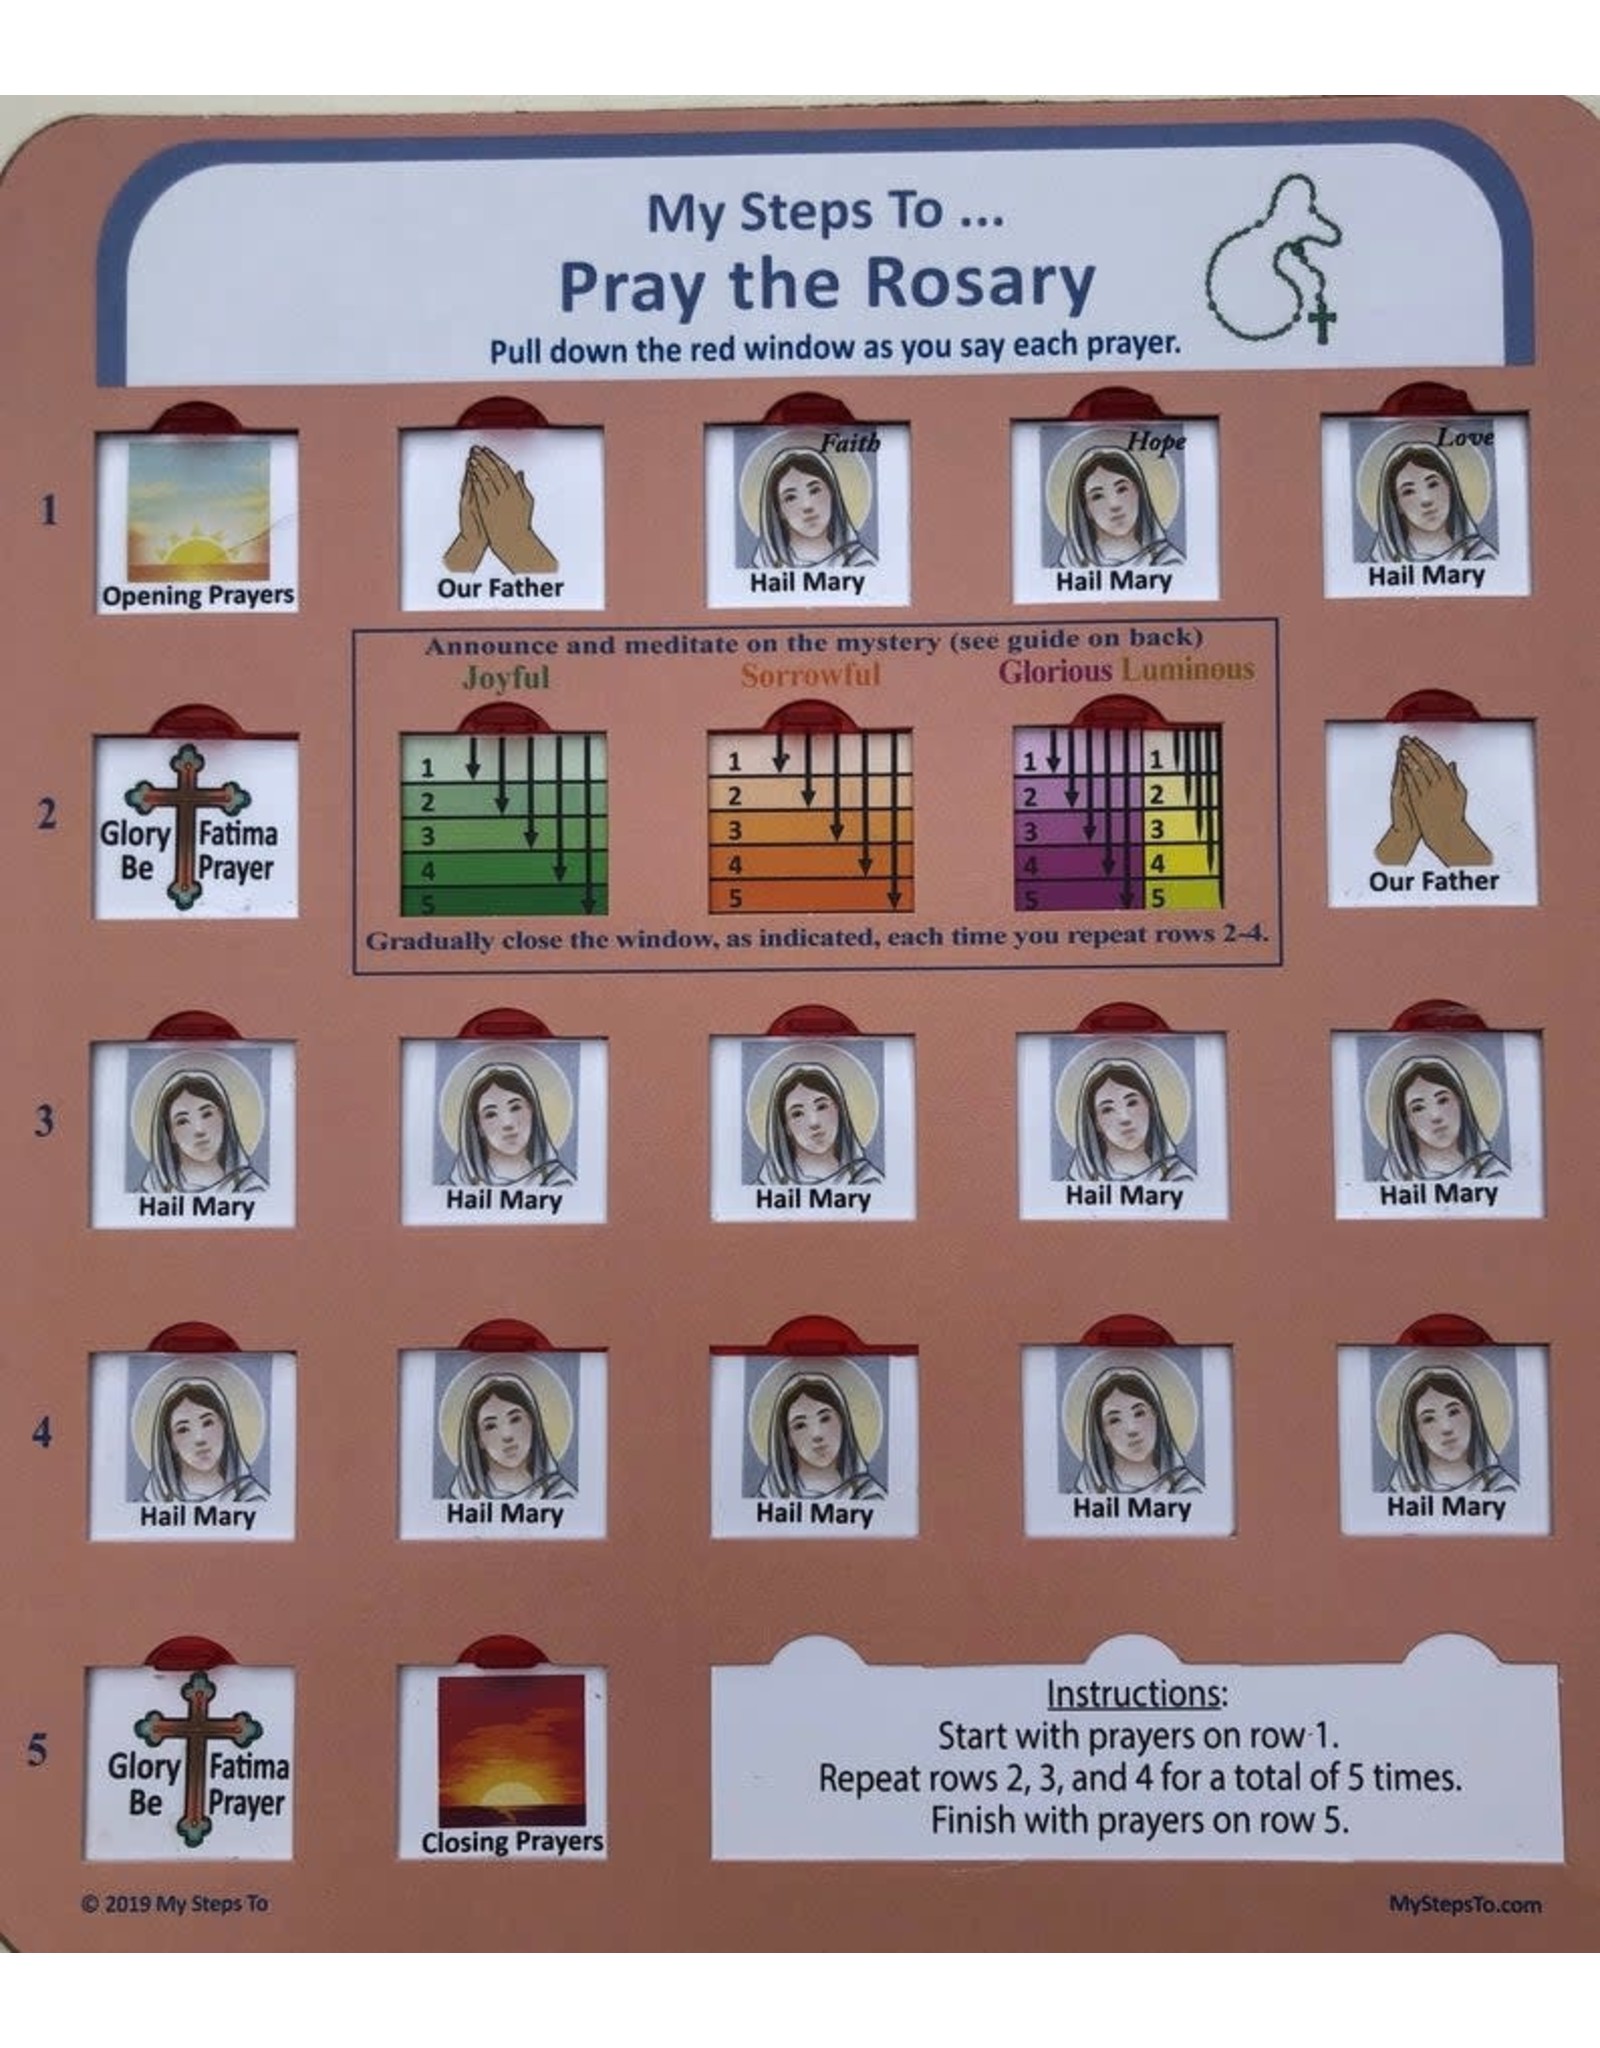 My Steps To My Steps to Pray the Rosary (with pull-down sliders)